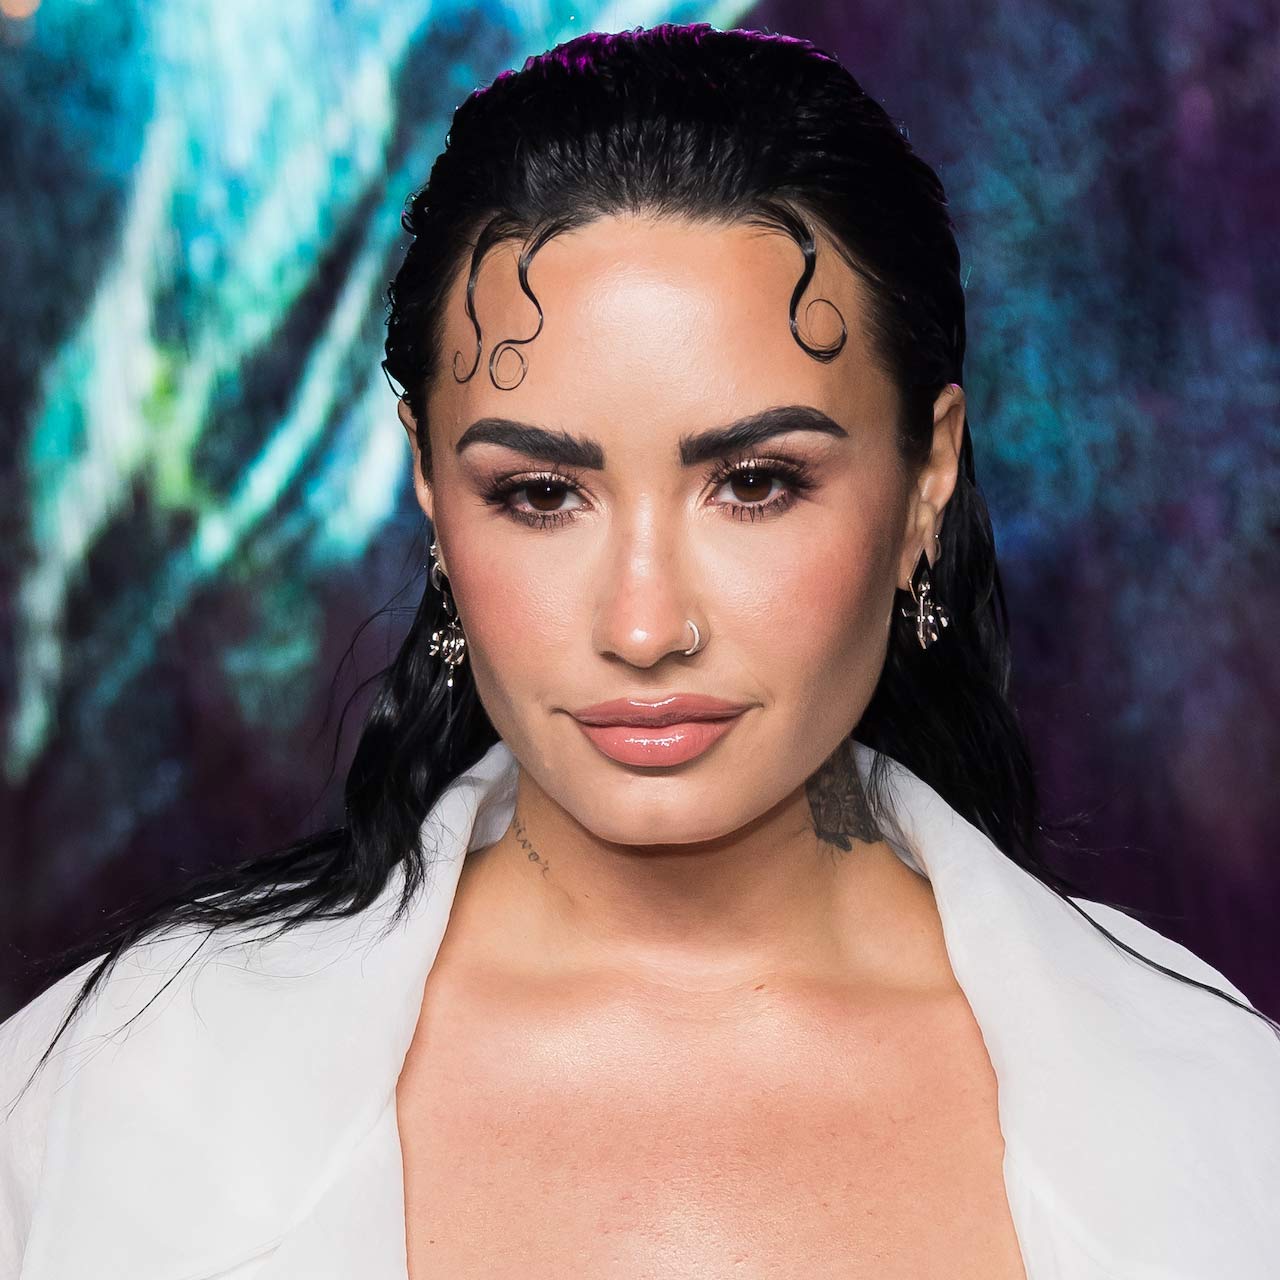 Demi Lovato Rocks Out On Her New Version Of 'Cool for the Summer